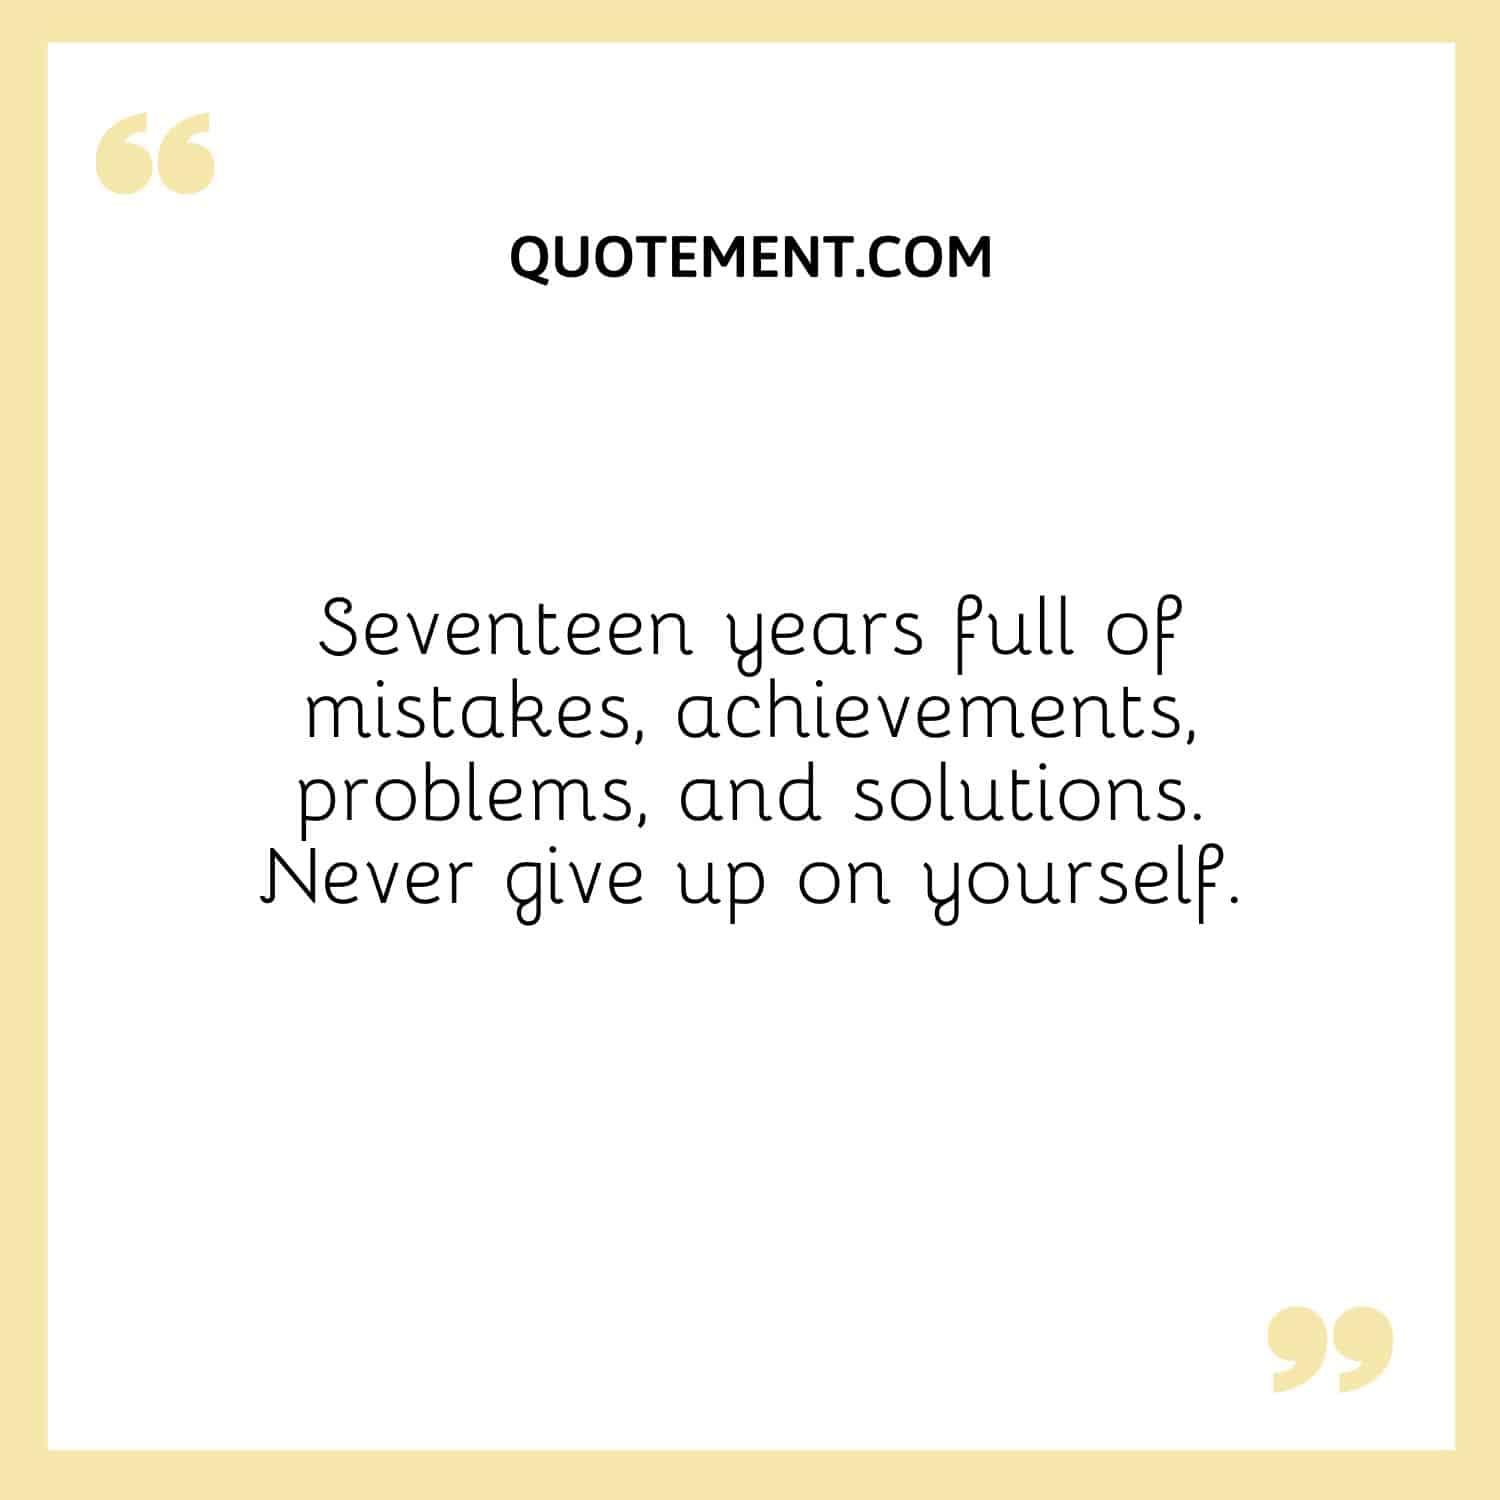 Seventeen years full of mistakes, achievements, problems, and solutions. Never give up on yourself.